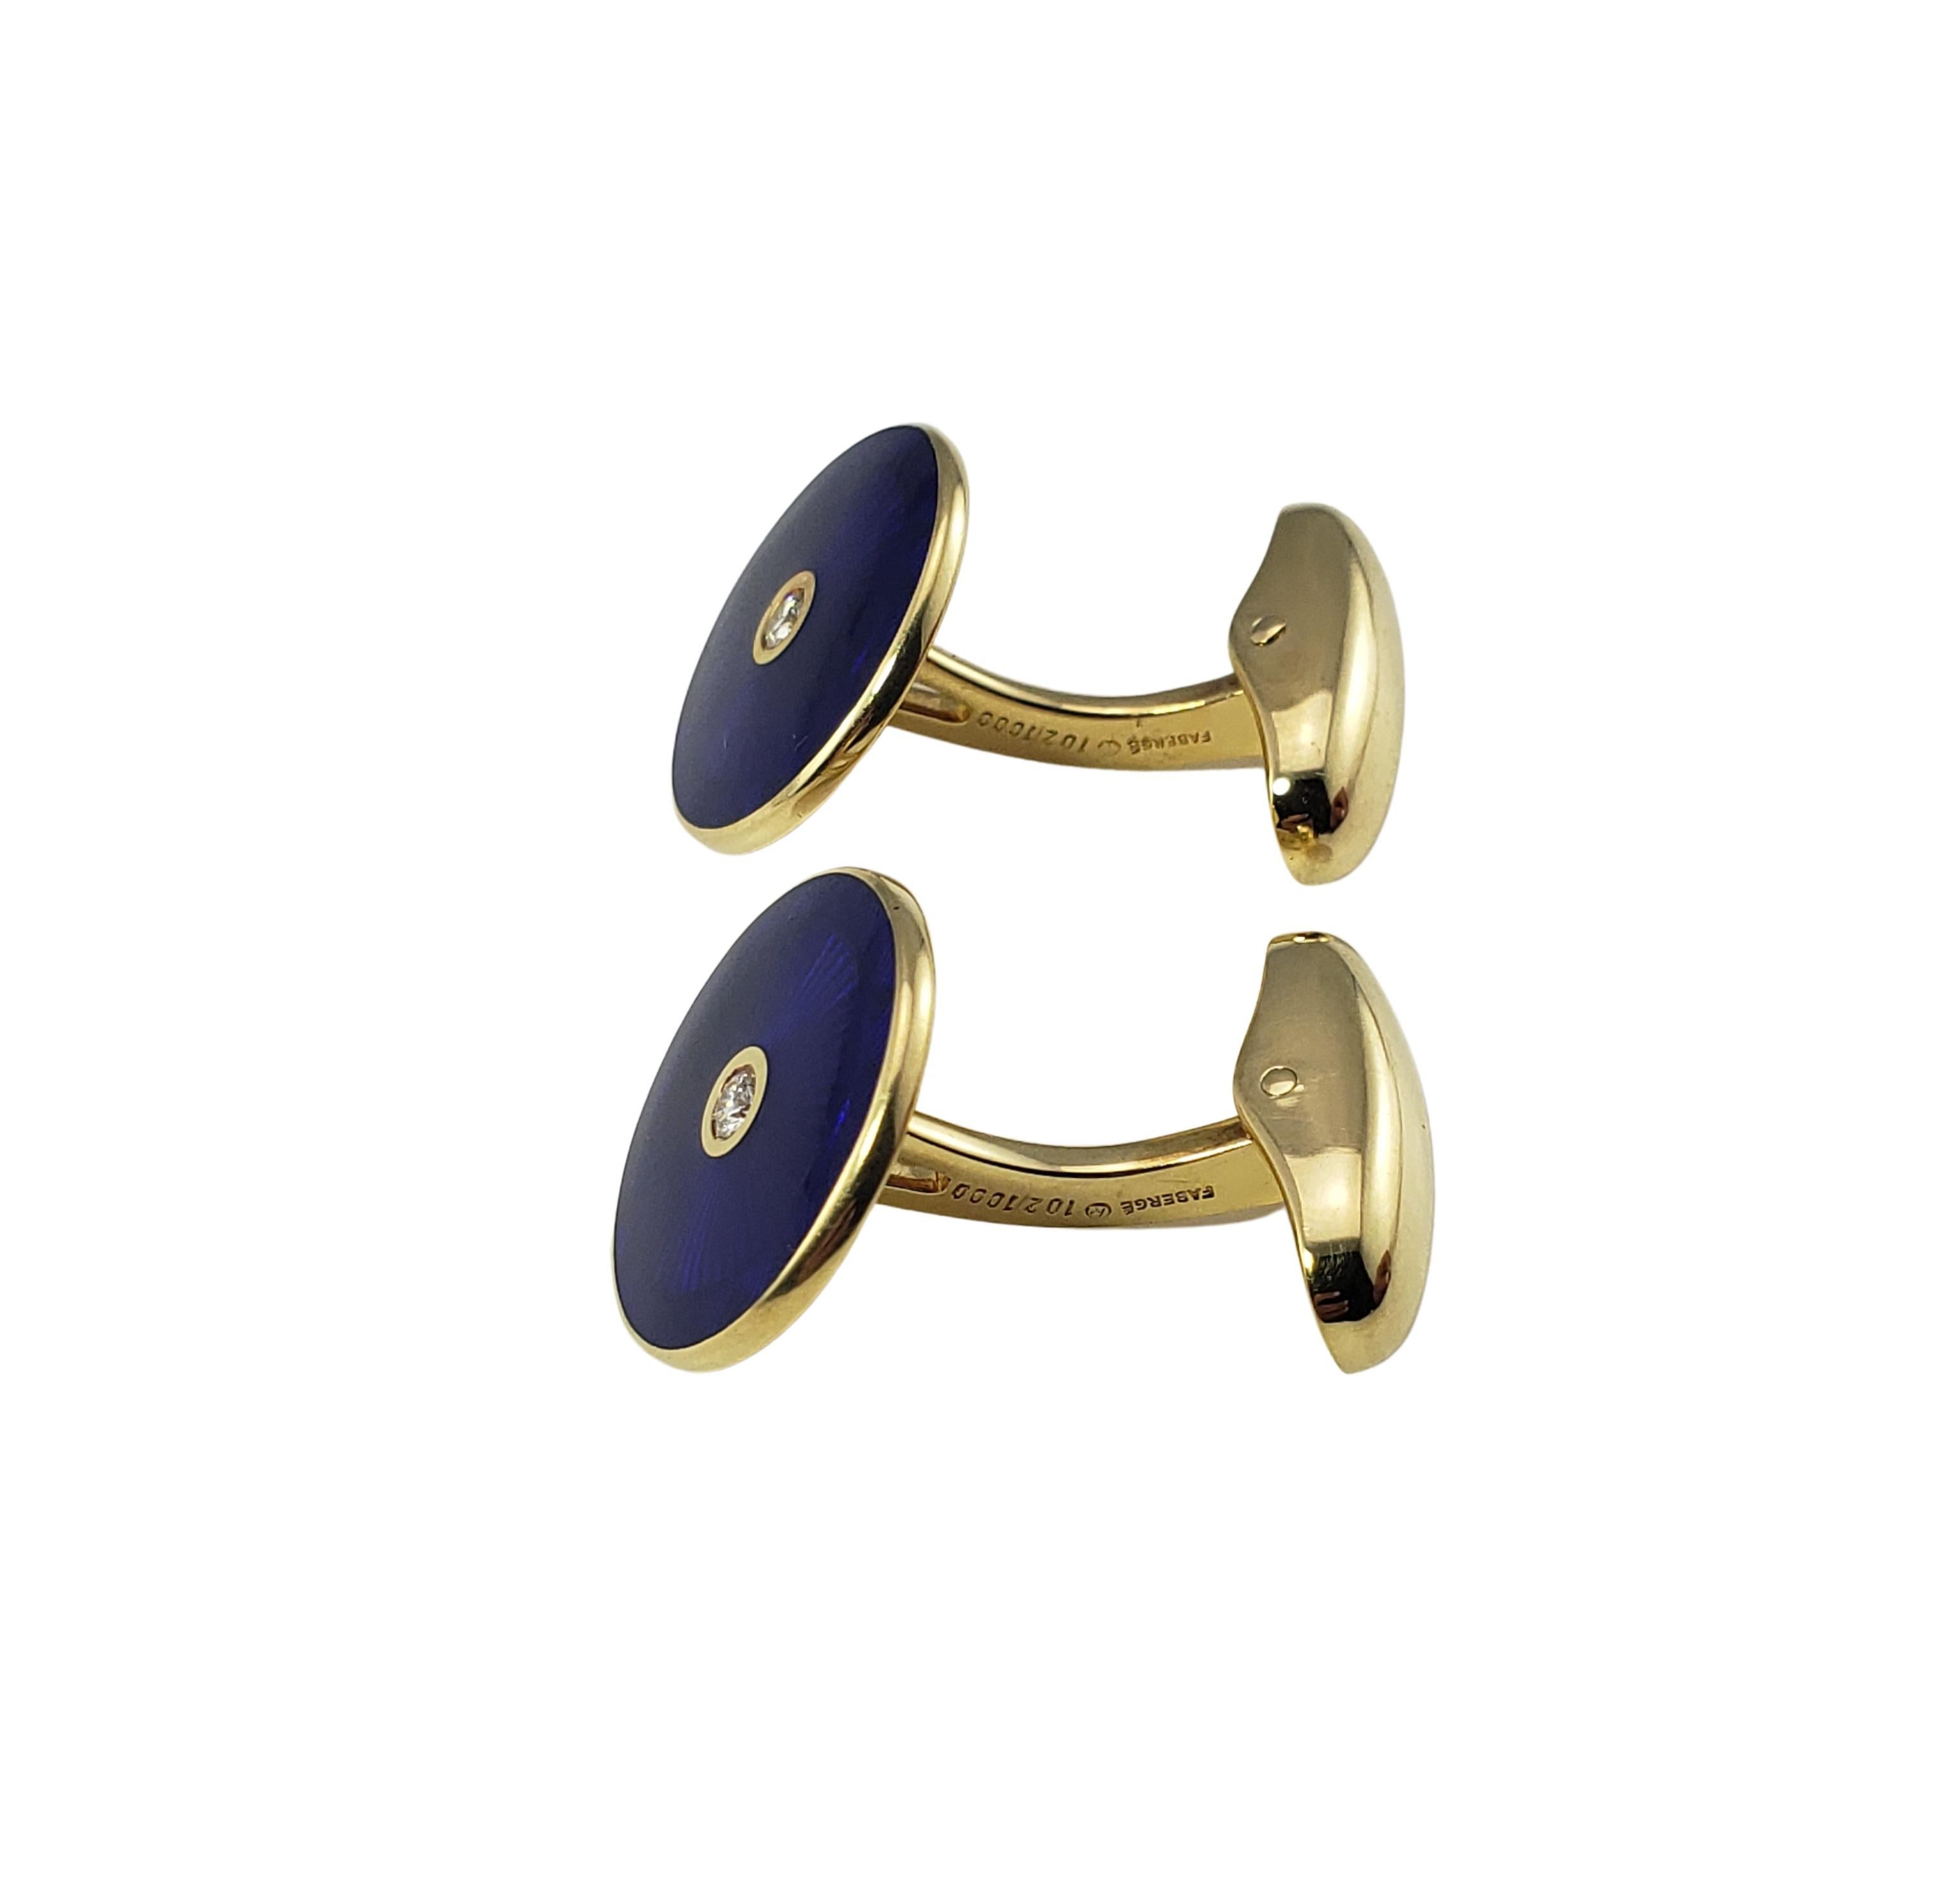 Faberge 18 Karat Yellow Gold Guilloche Enamel and Diamond Cufflinks-

This elegant limited edition pair of cufflinks are each crafted with guilloche enamel and one round brilliant cut diamond set in classic 18K yellow gold.  

Approximate total